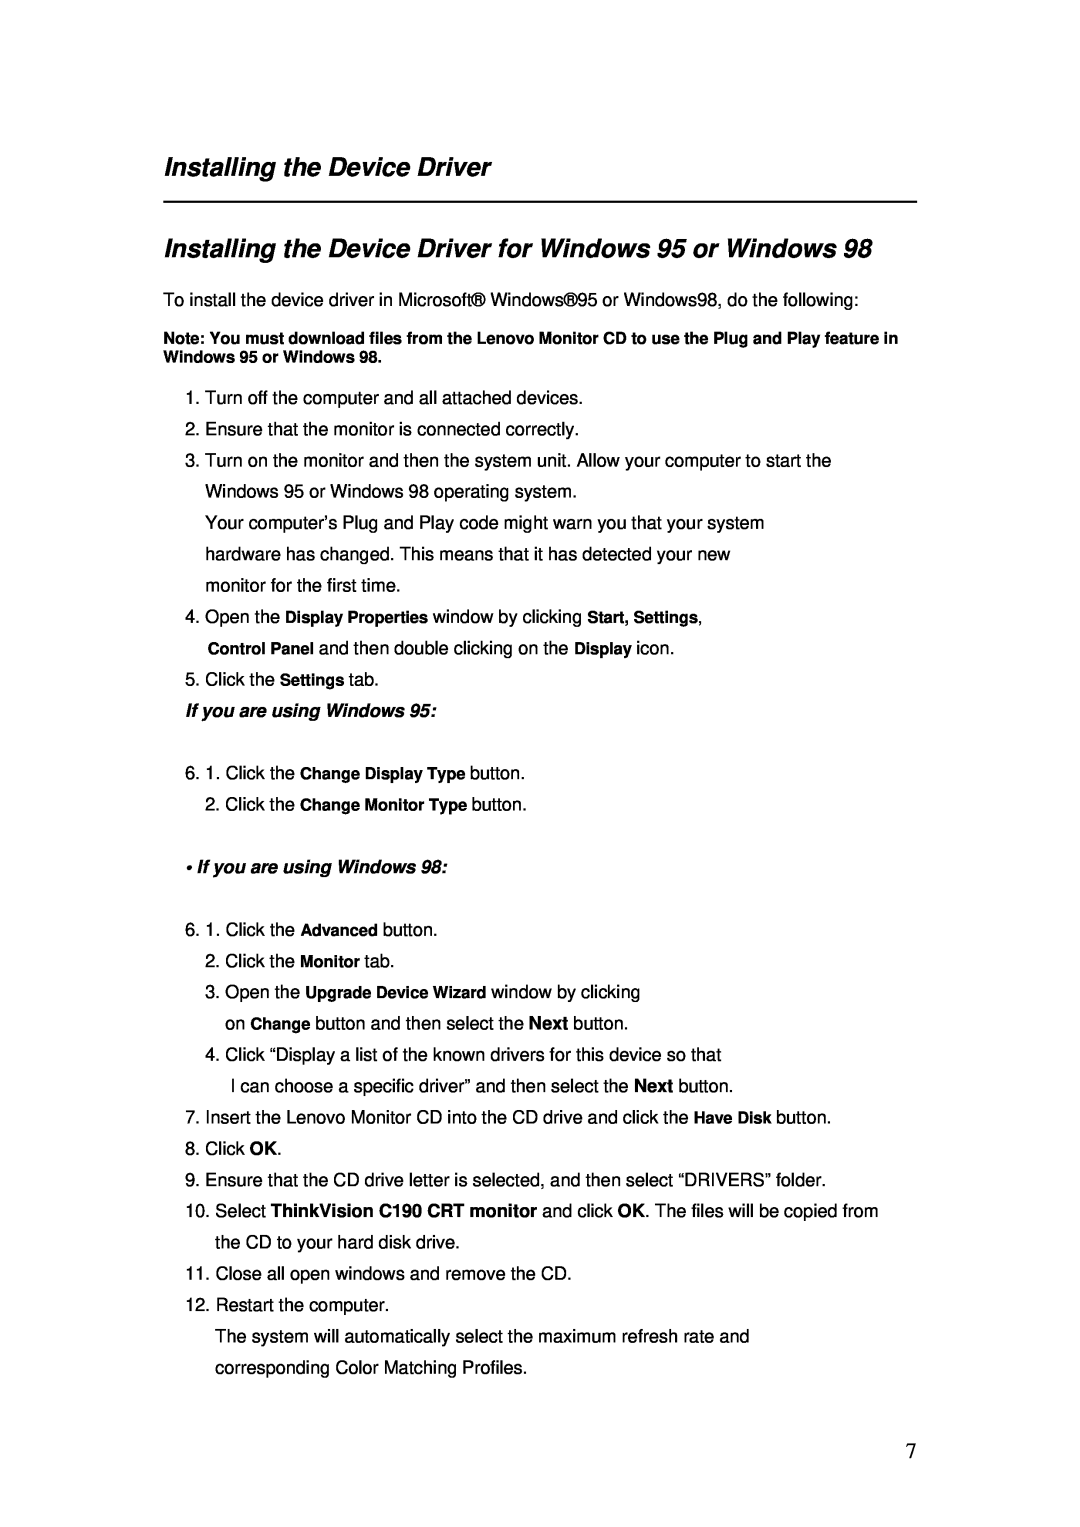 Lenovo C190 manual Installing the Device Driver for Windows 95 or Windows, If you are using Windows 